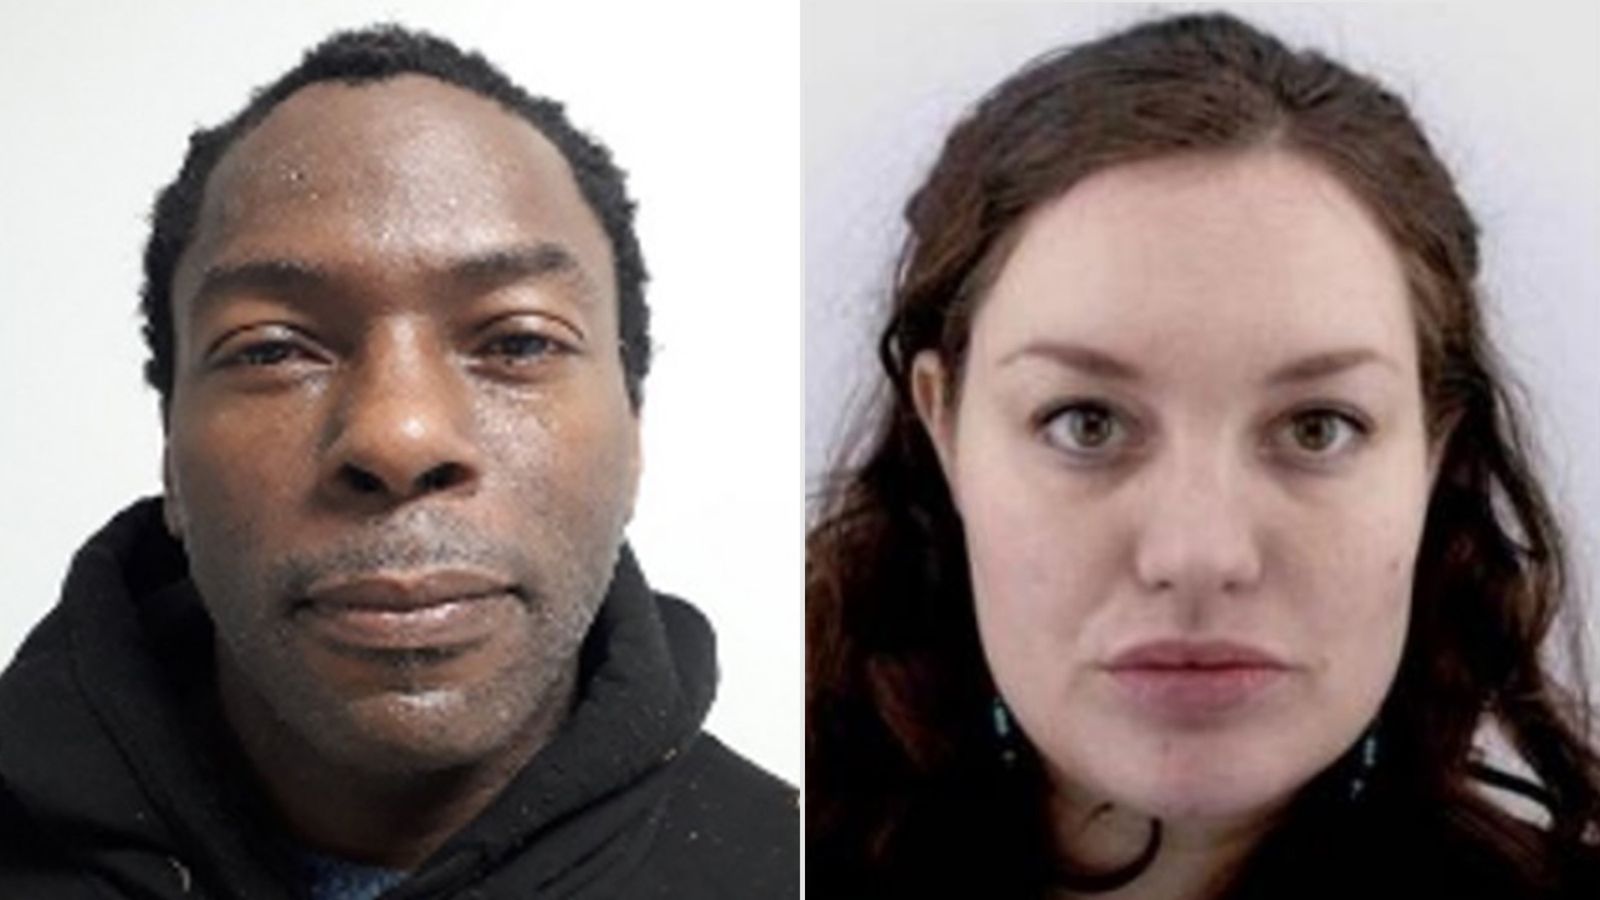 Constance Marten and Mark Gordon charged with gross negligence manslaughter after baby's remains found in Brighton